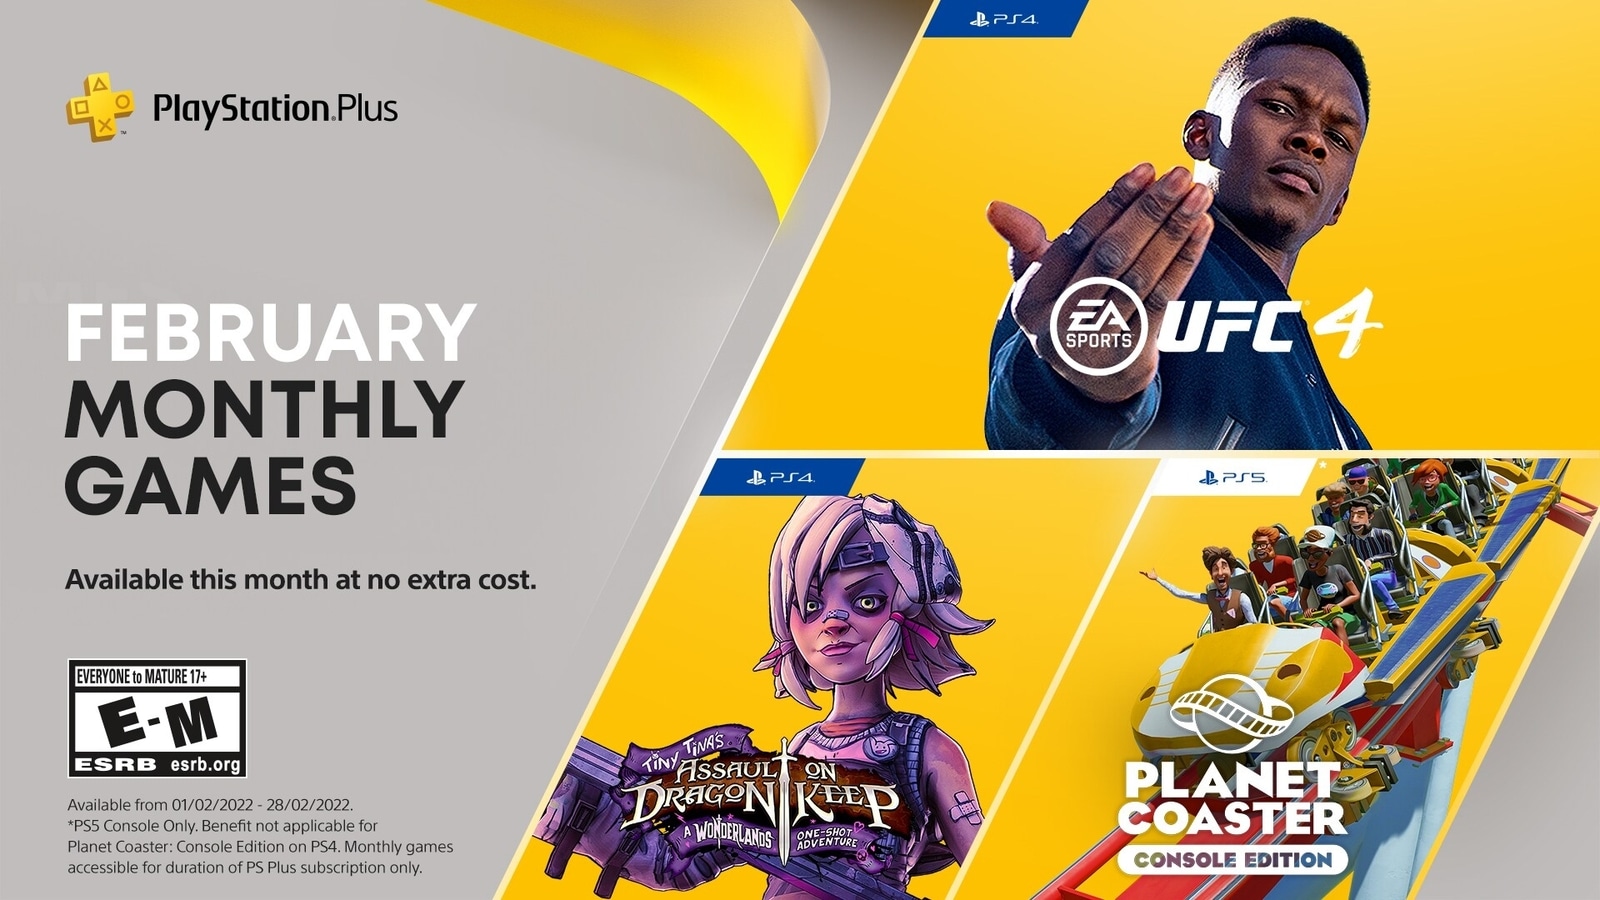 PlayStation Plus gets three free games- EA Sports UFC 4 to Planet Coaster Gaming News